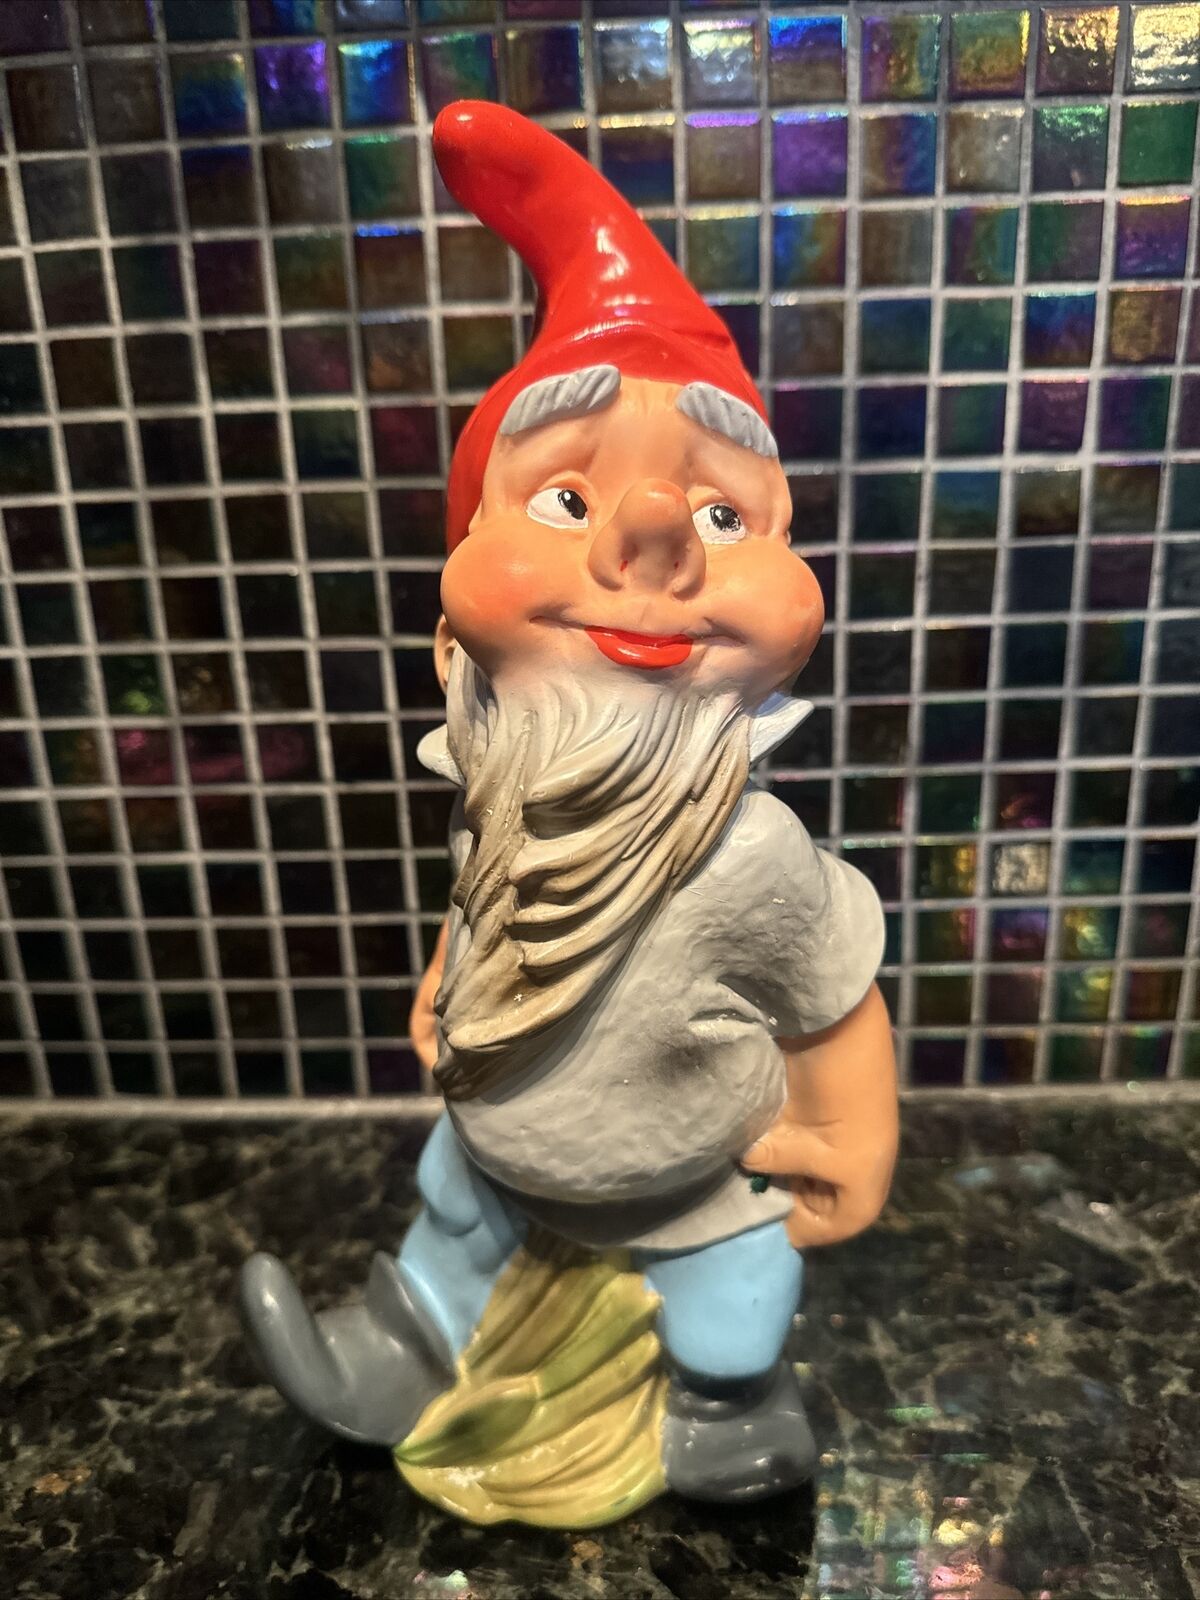 Vintage Heissner Gnome West Germany 11” Rubber/plastic Figurine #942 Red Hat GUC